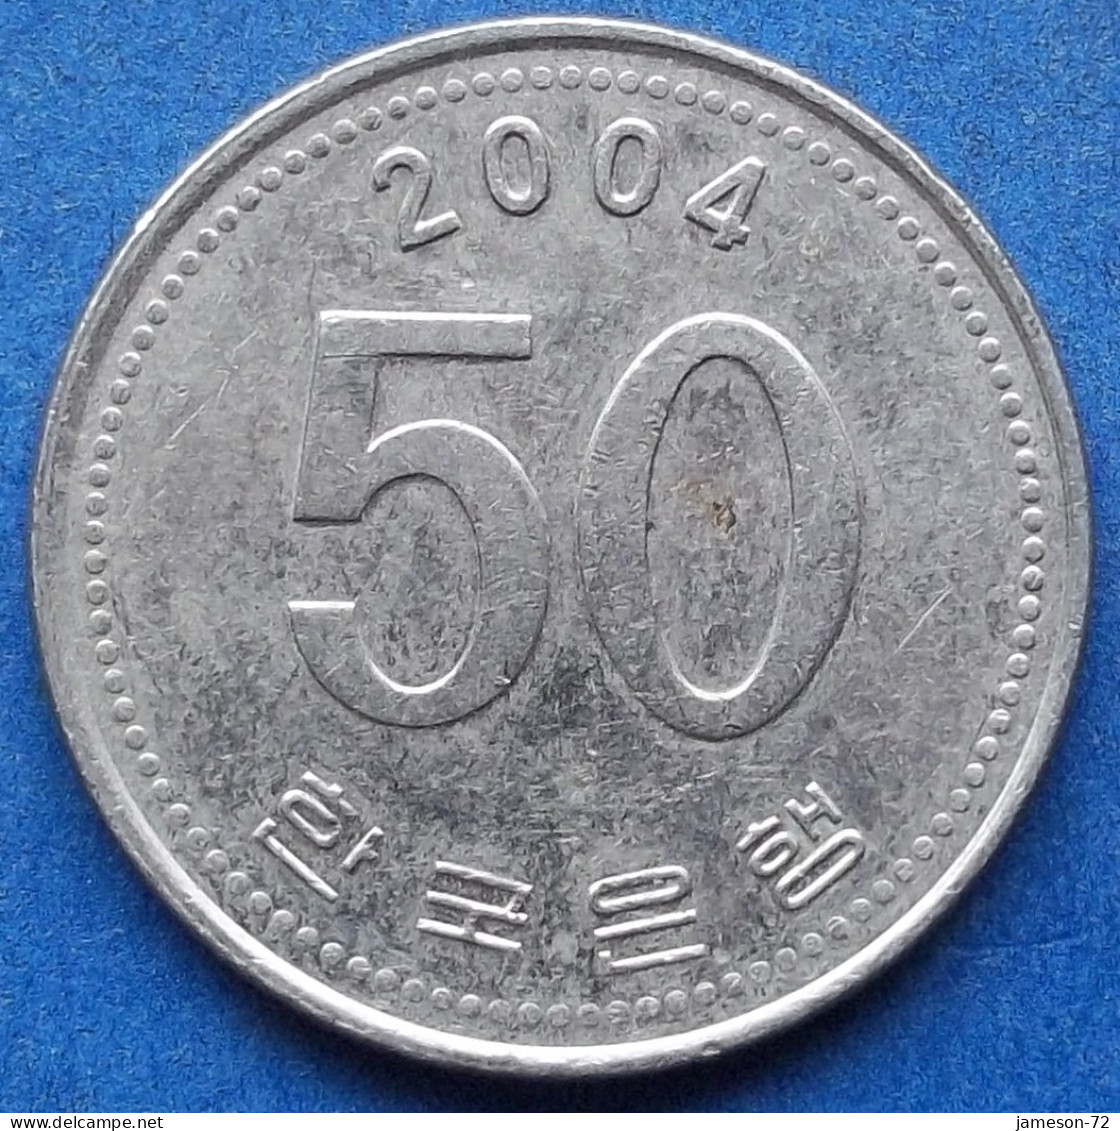 SOUTH KOREA - 50 Won 2004 "Oat Sprig" KM# 34 Monetary Reform (1966) - Edelweiss Coins - Coreal Del Sur